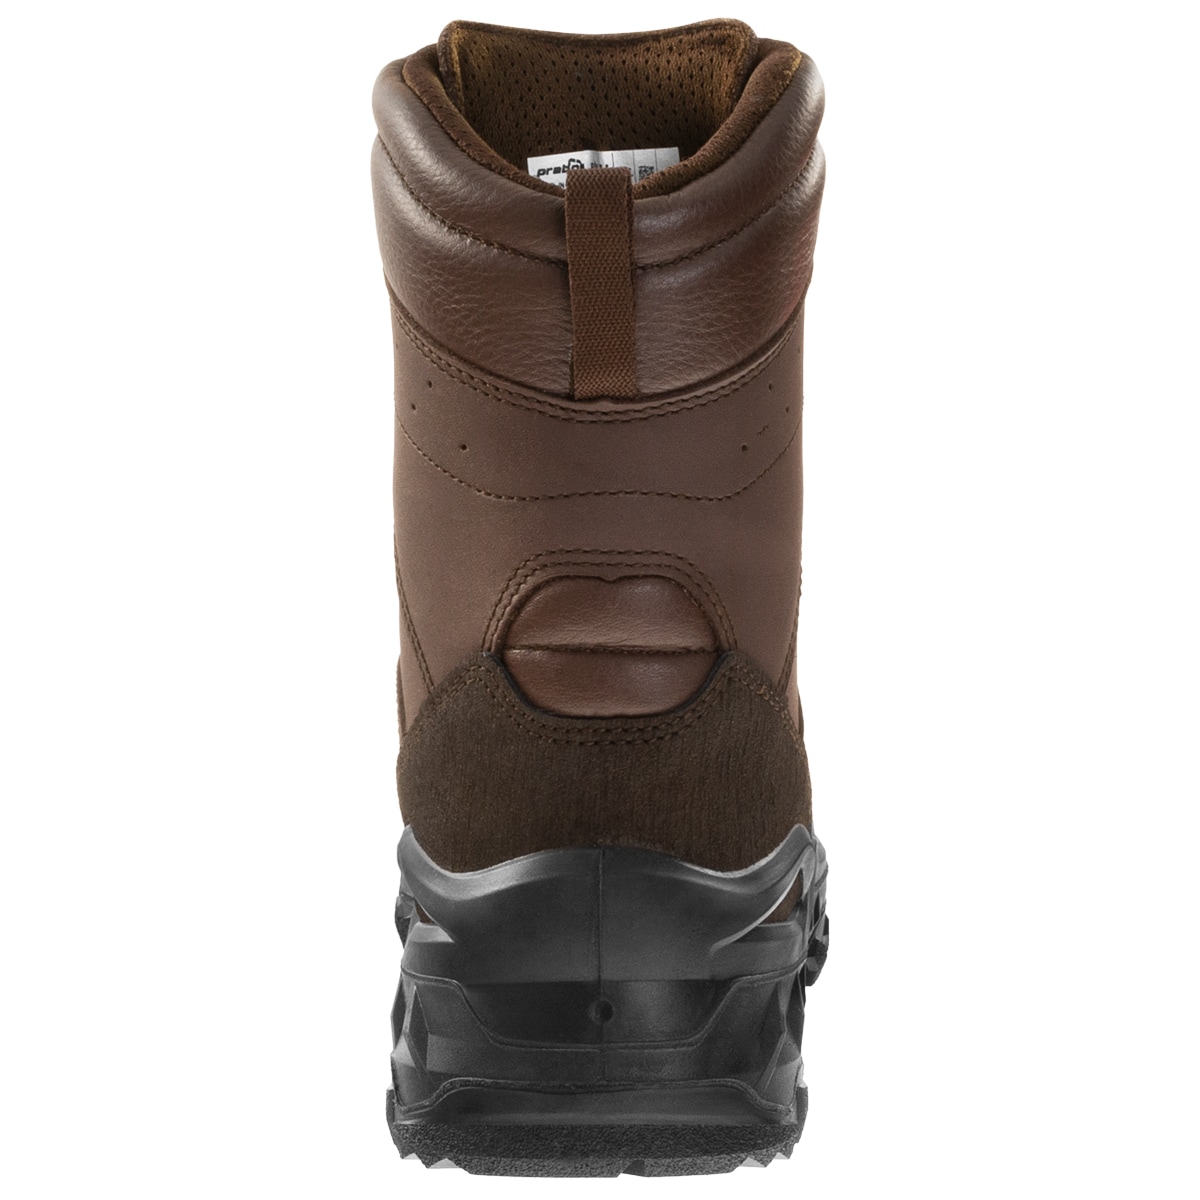 Buty Prabos Grizzly GTX - Brown